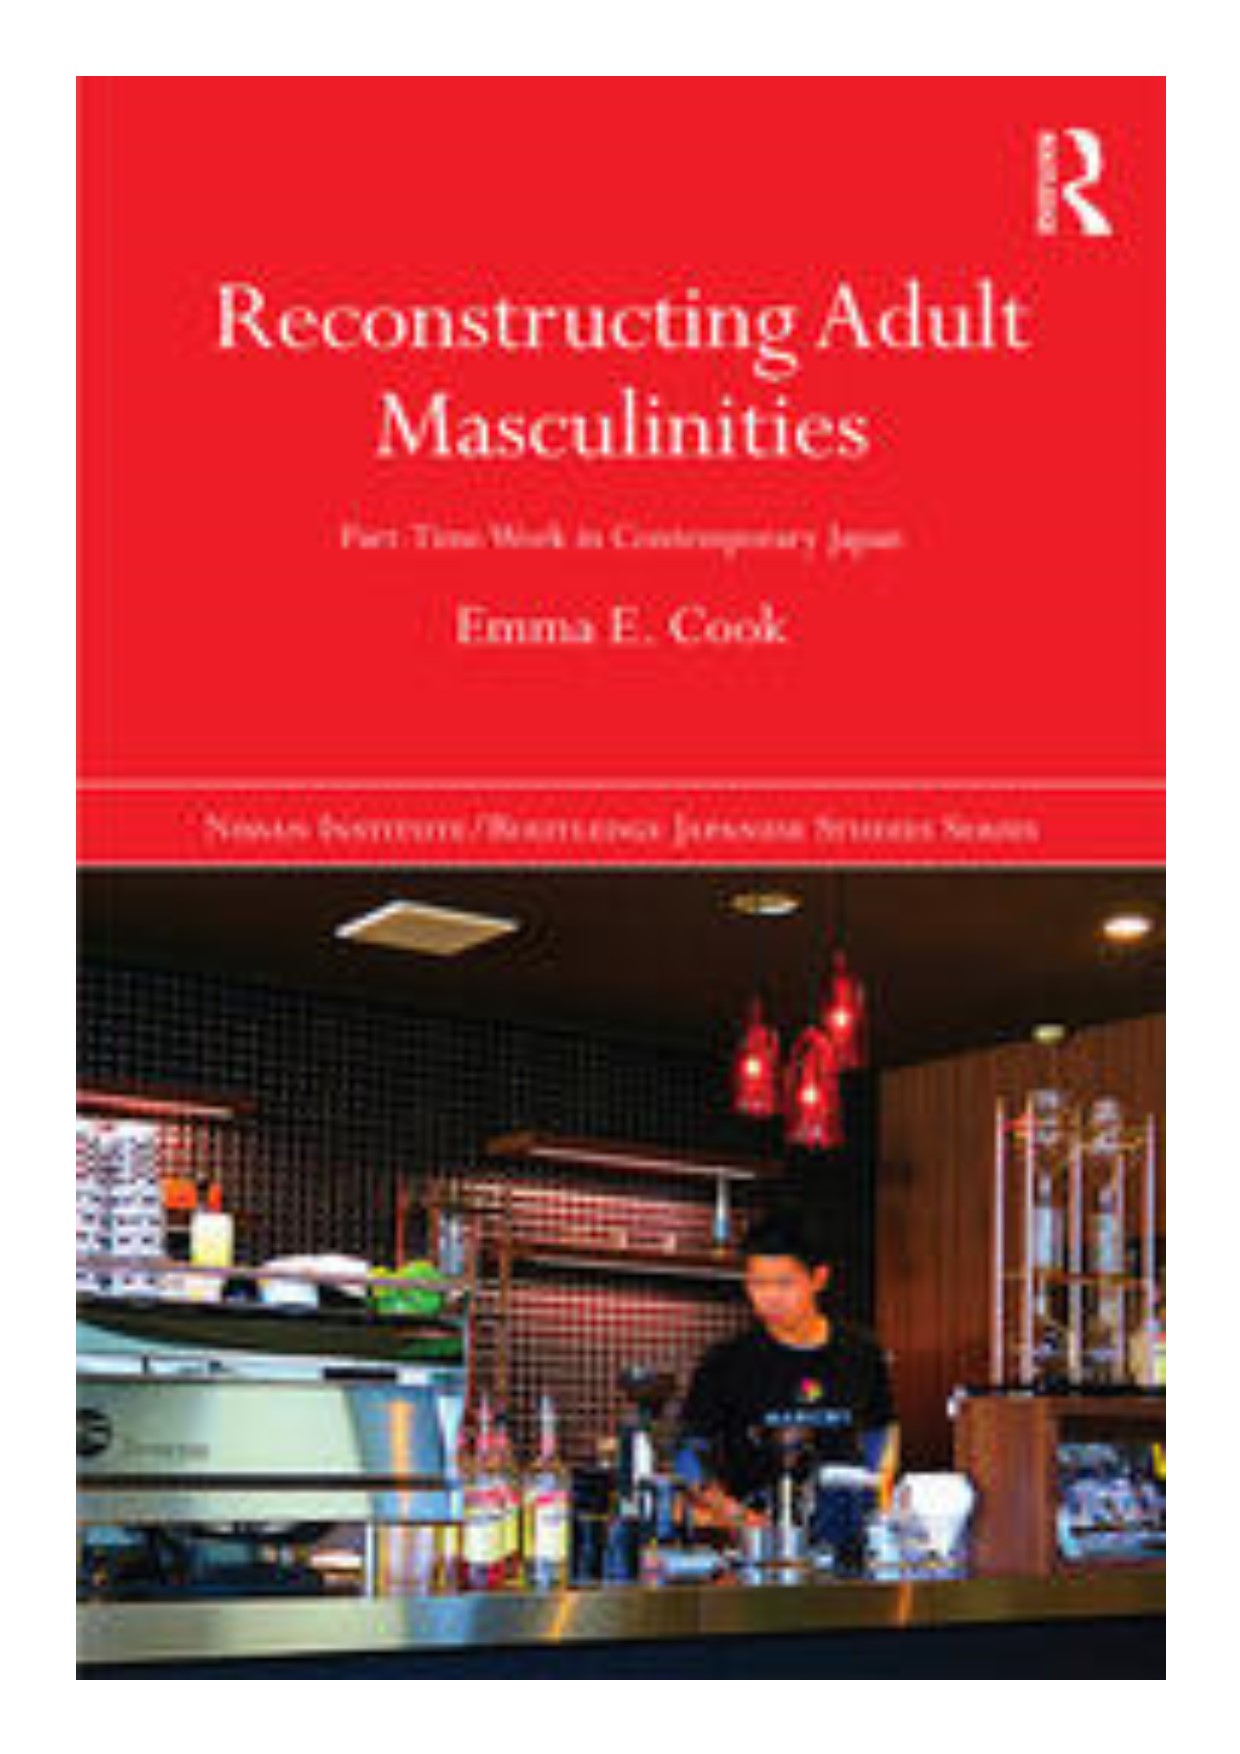 Reconstructing adult masculinities part-time work in contemporary Japan